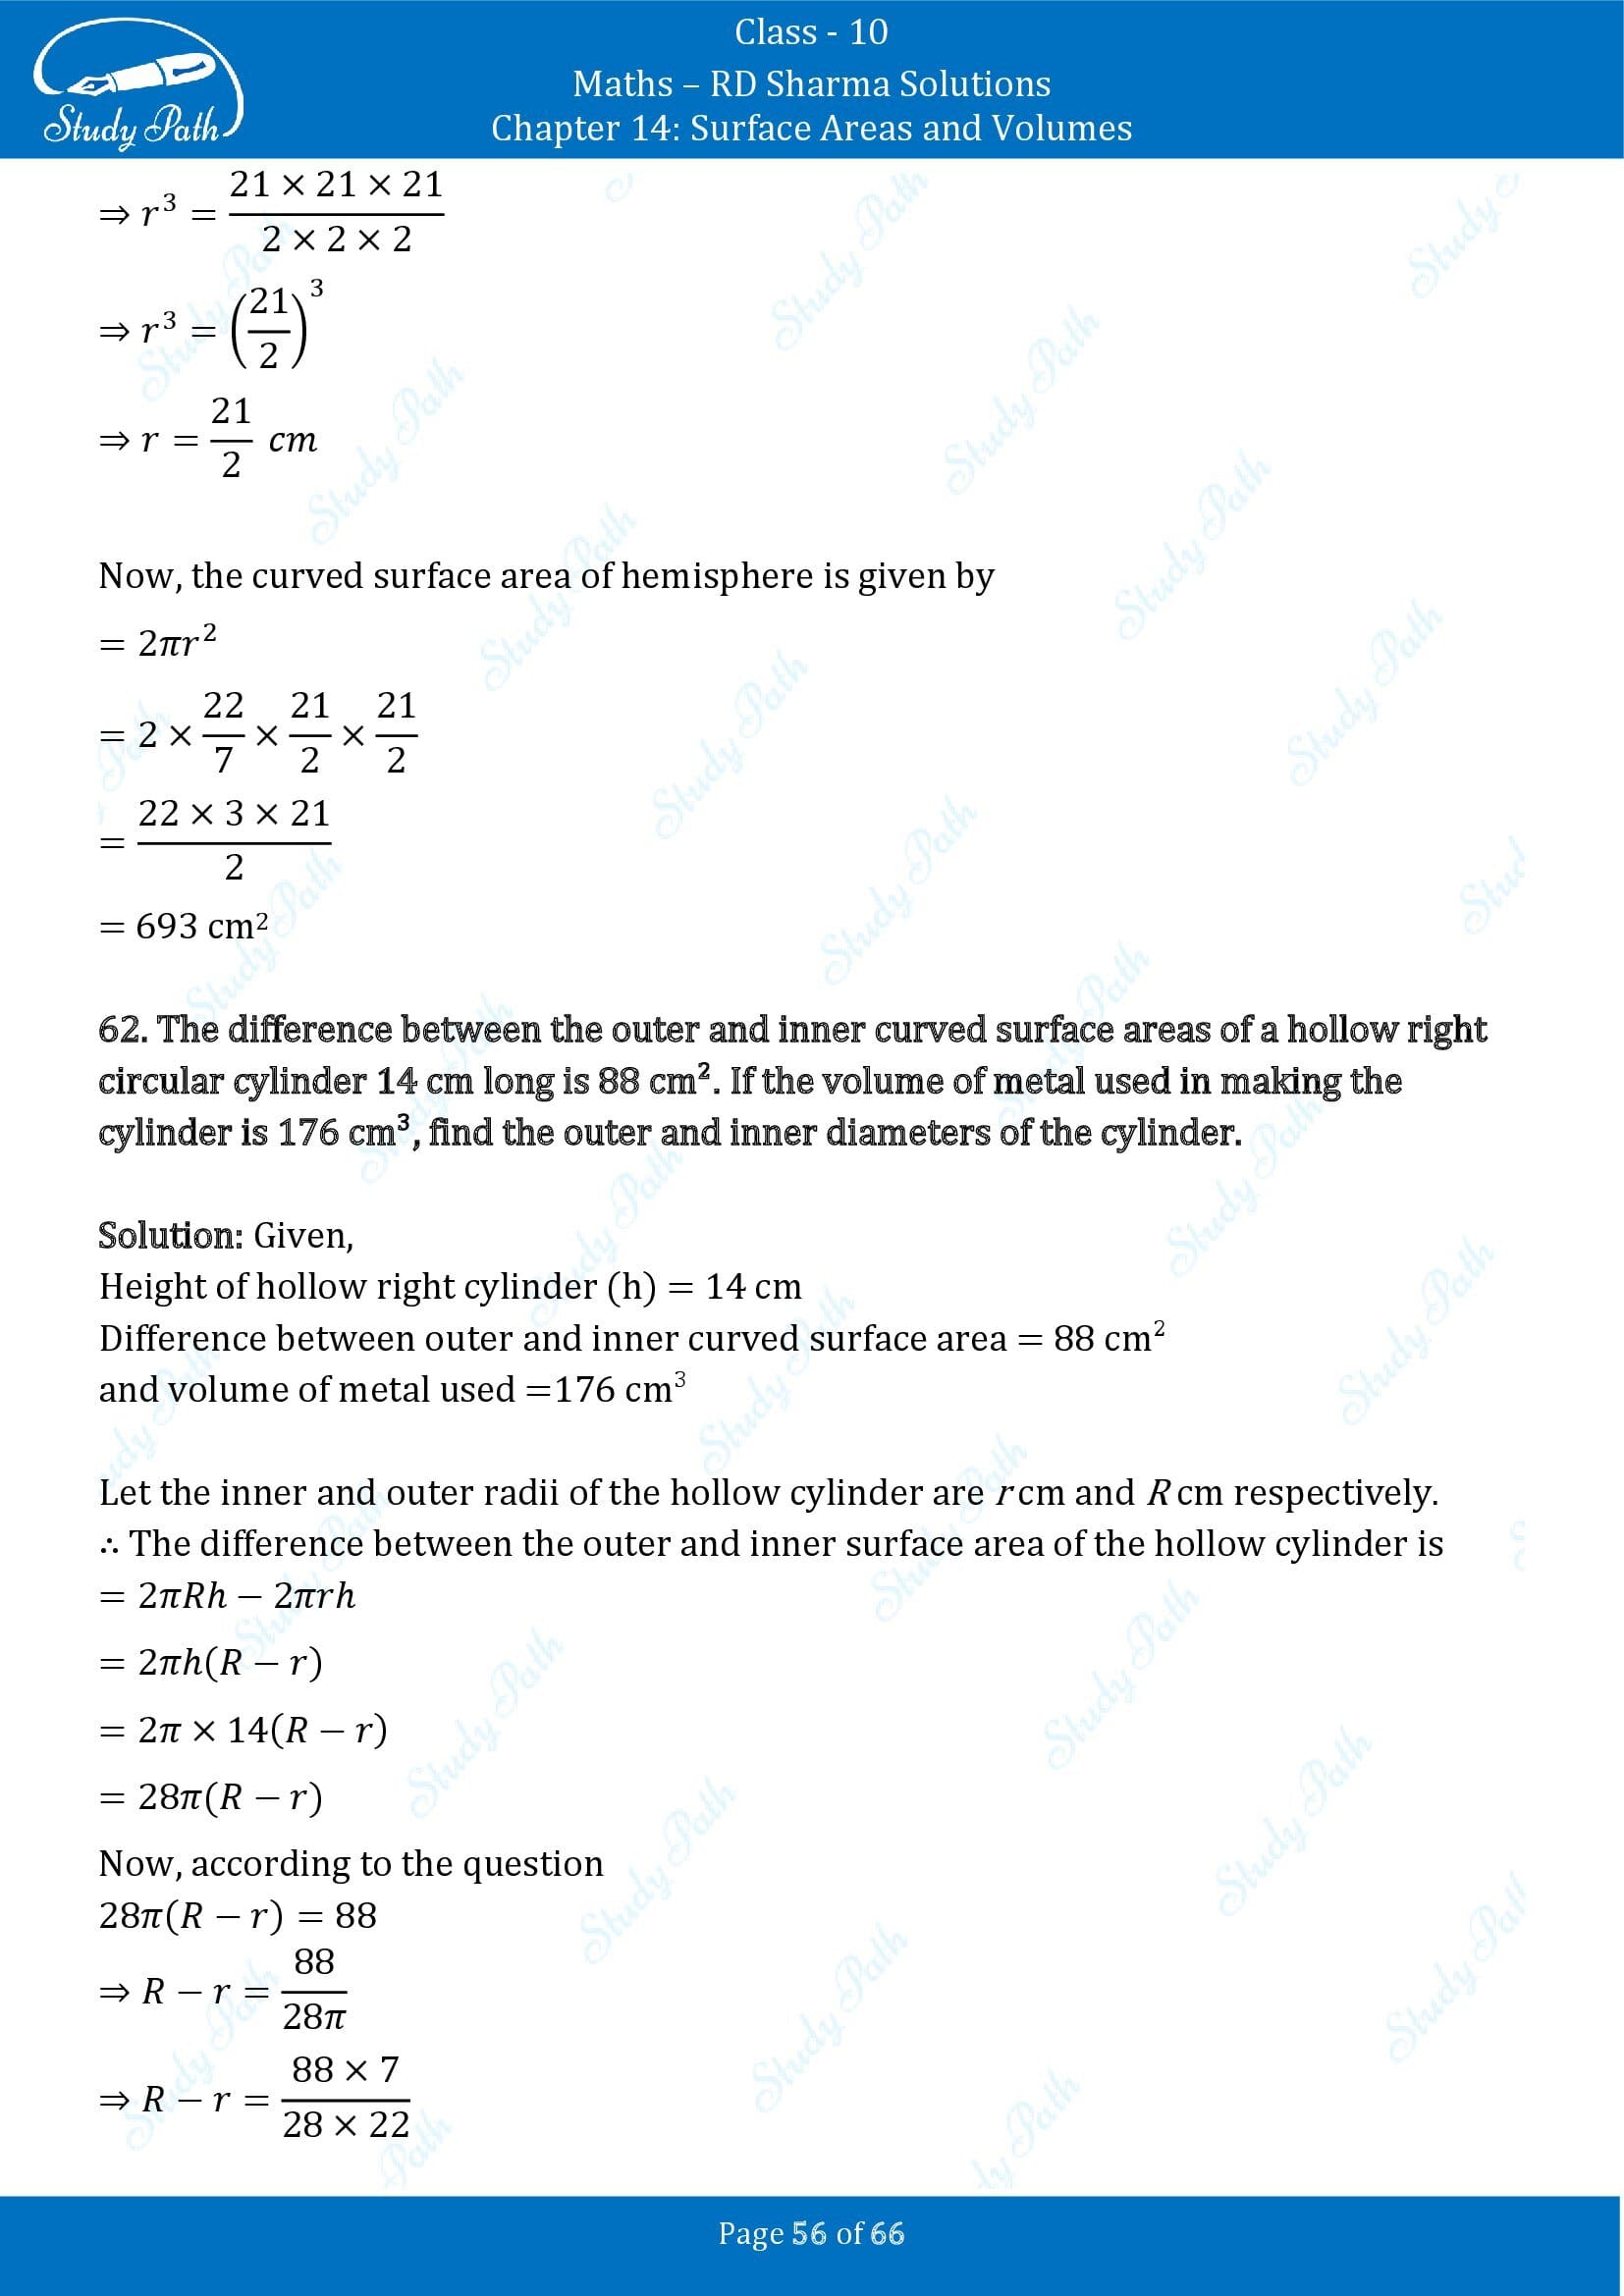 RD Sharma Solutions Class 10 Chapter 14 Surface Areas and Volumes Exercise 14.1 00056